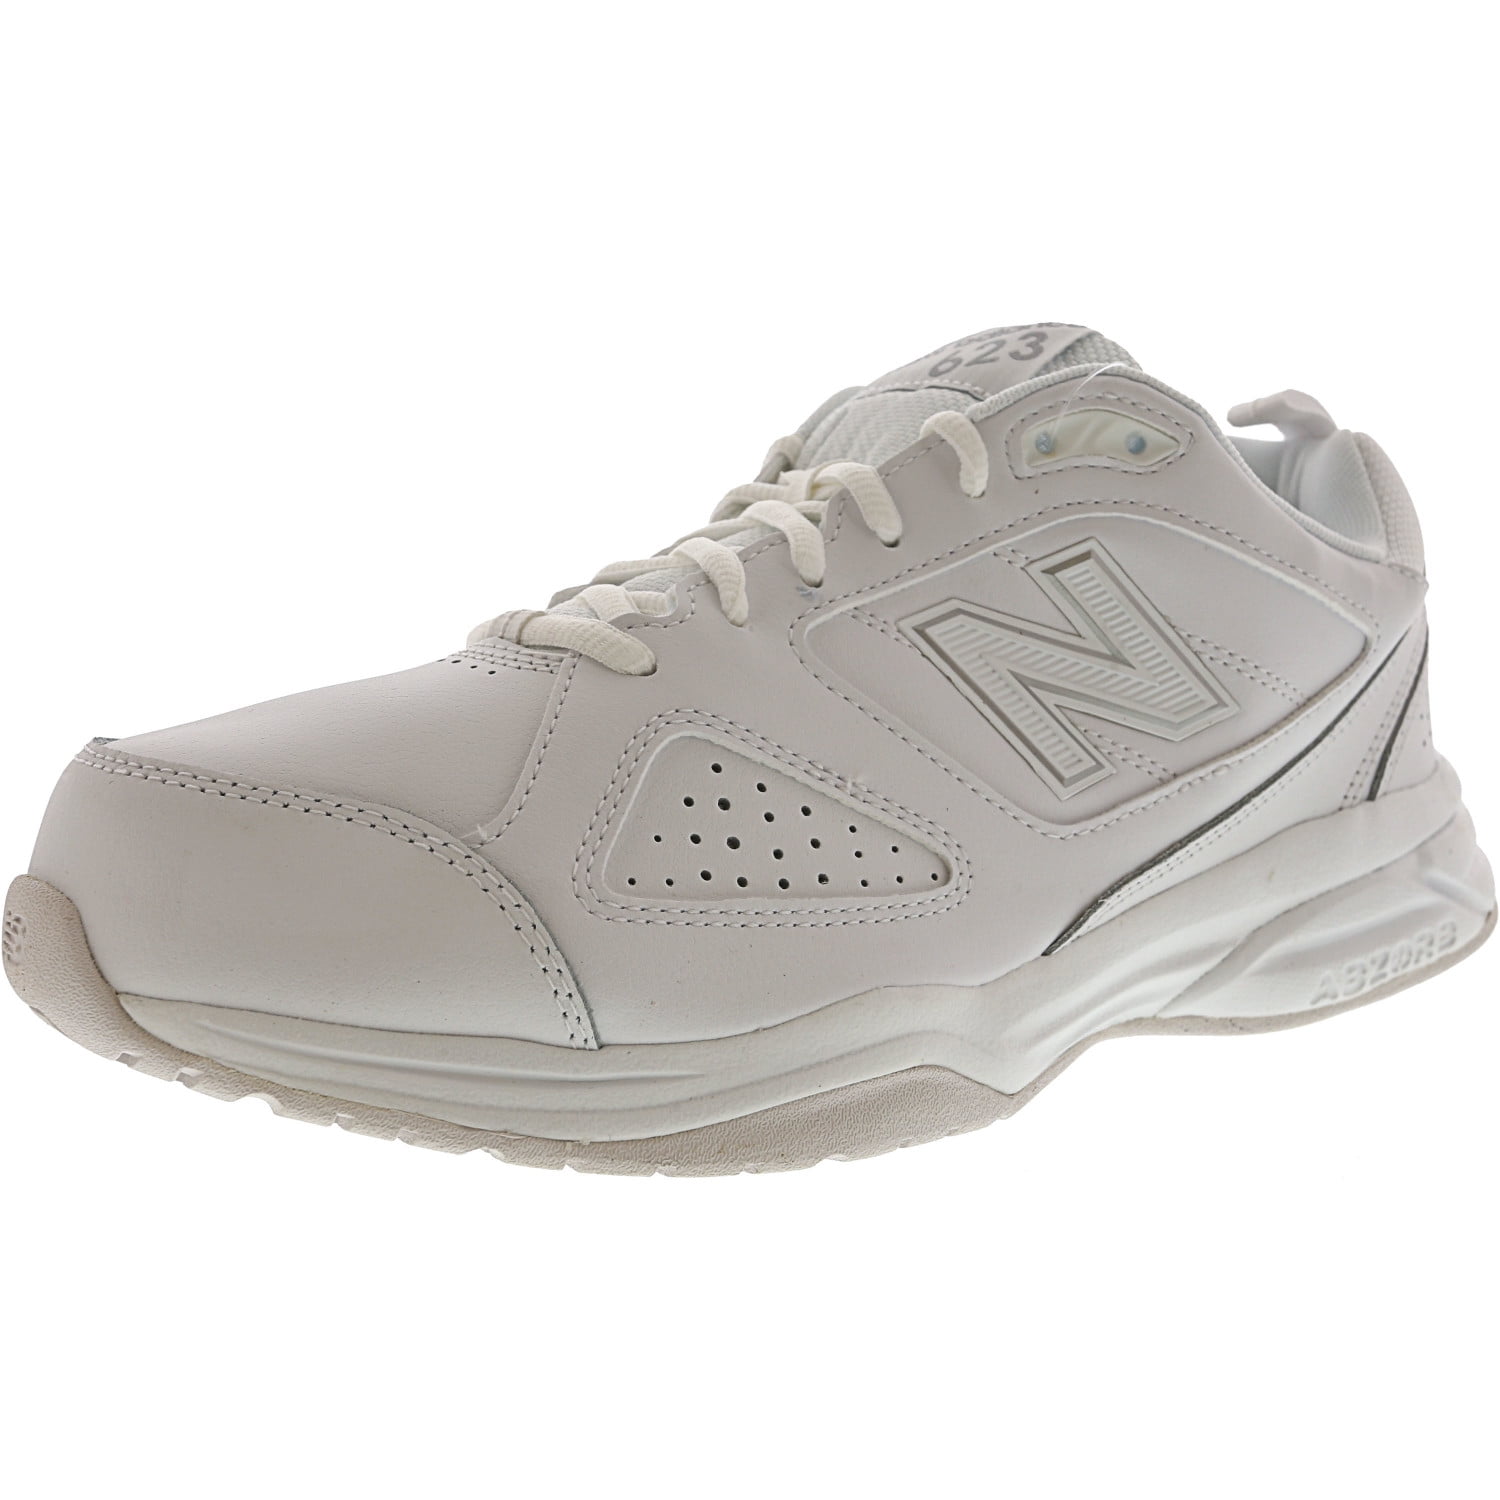 New Balance Men's Mx623 Aw3 Ankle-High Cross Trainer Shoe - 11W ...